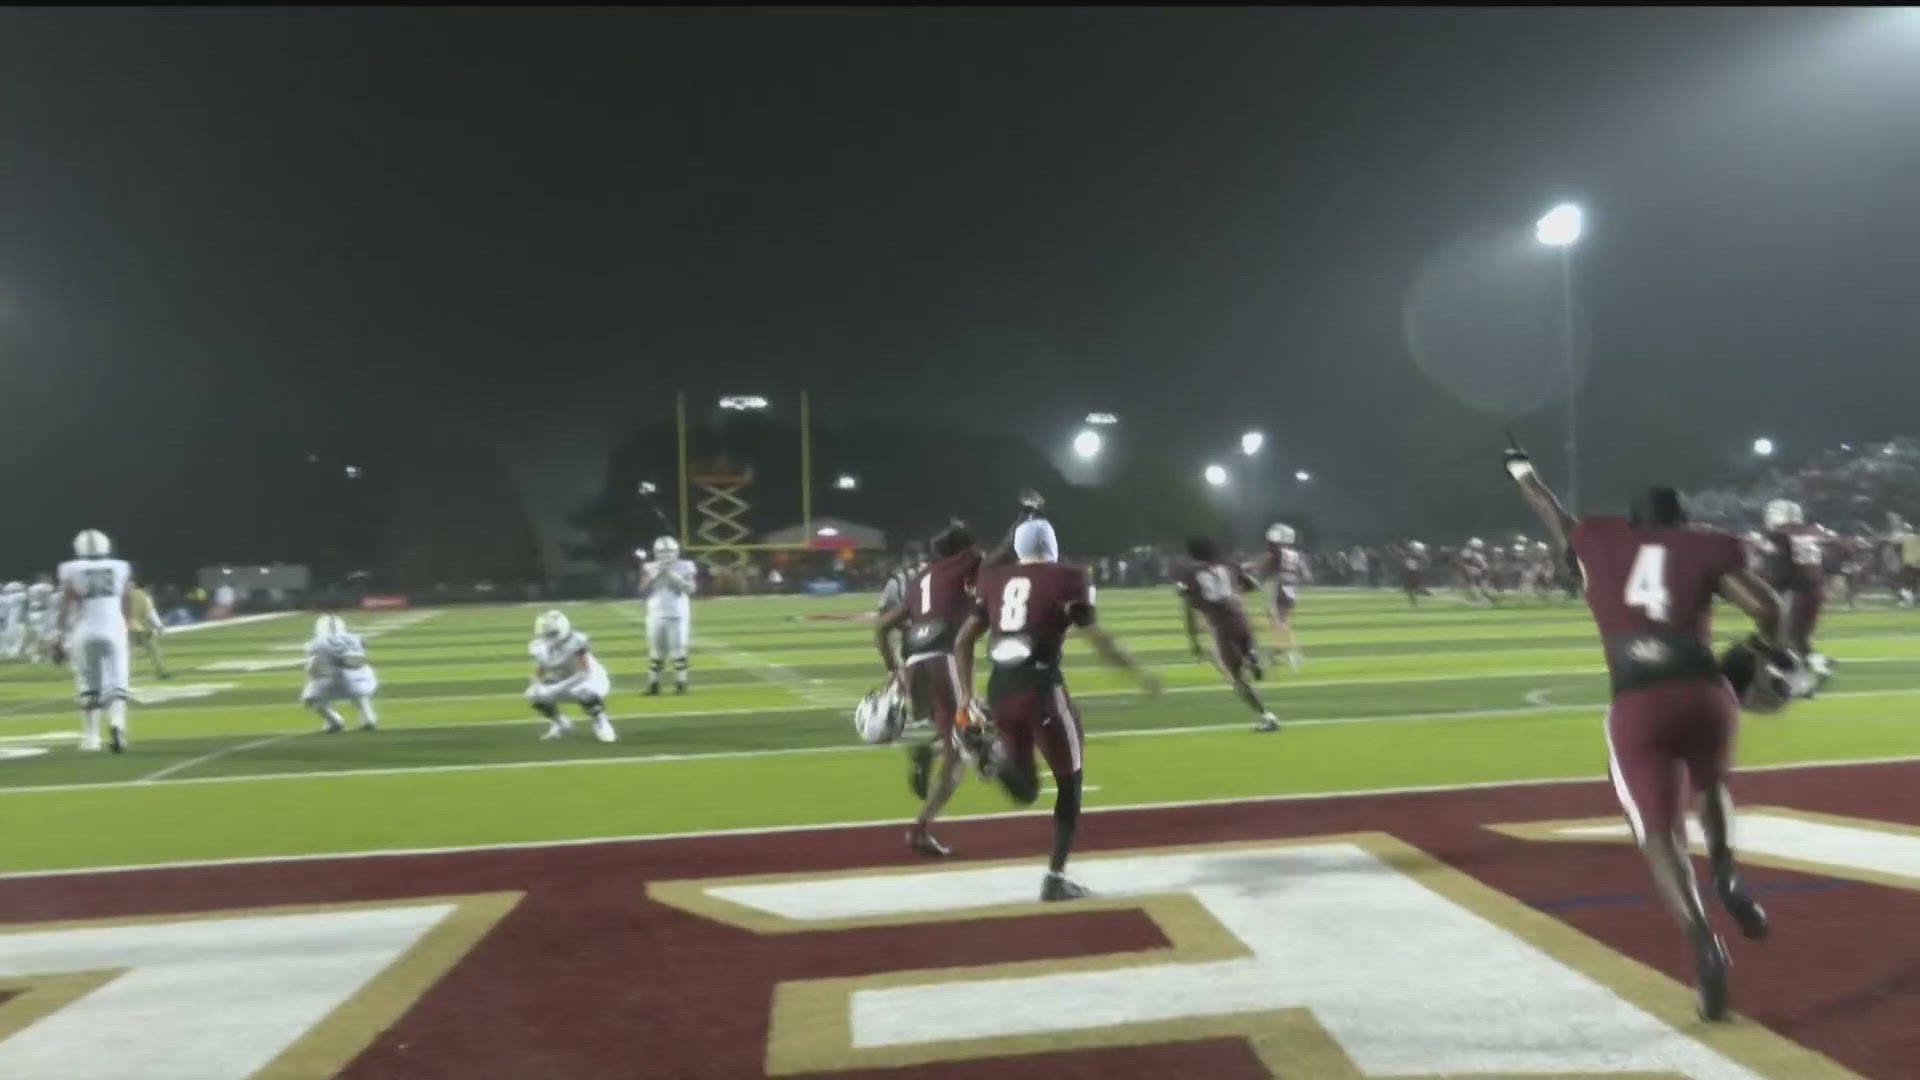 Mill Creek picked up a big Region 8-7A win 31-24 on a go-ahead touchdown in a game that was seen on ESPN2.